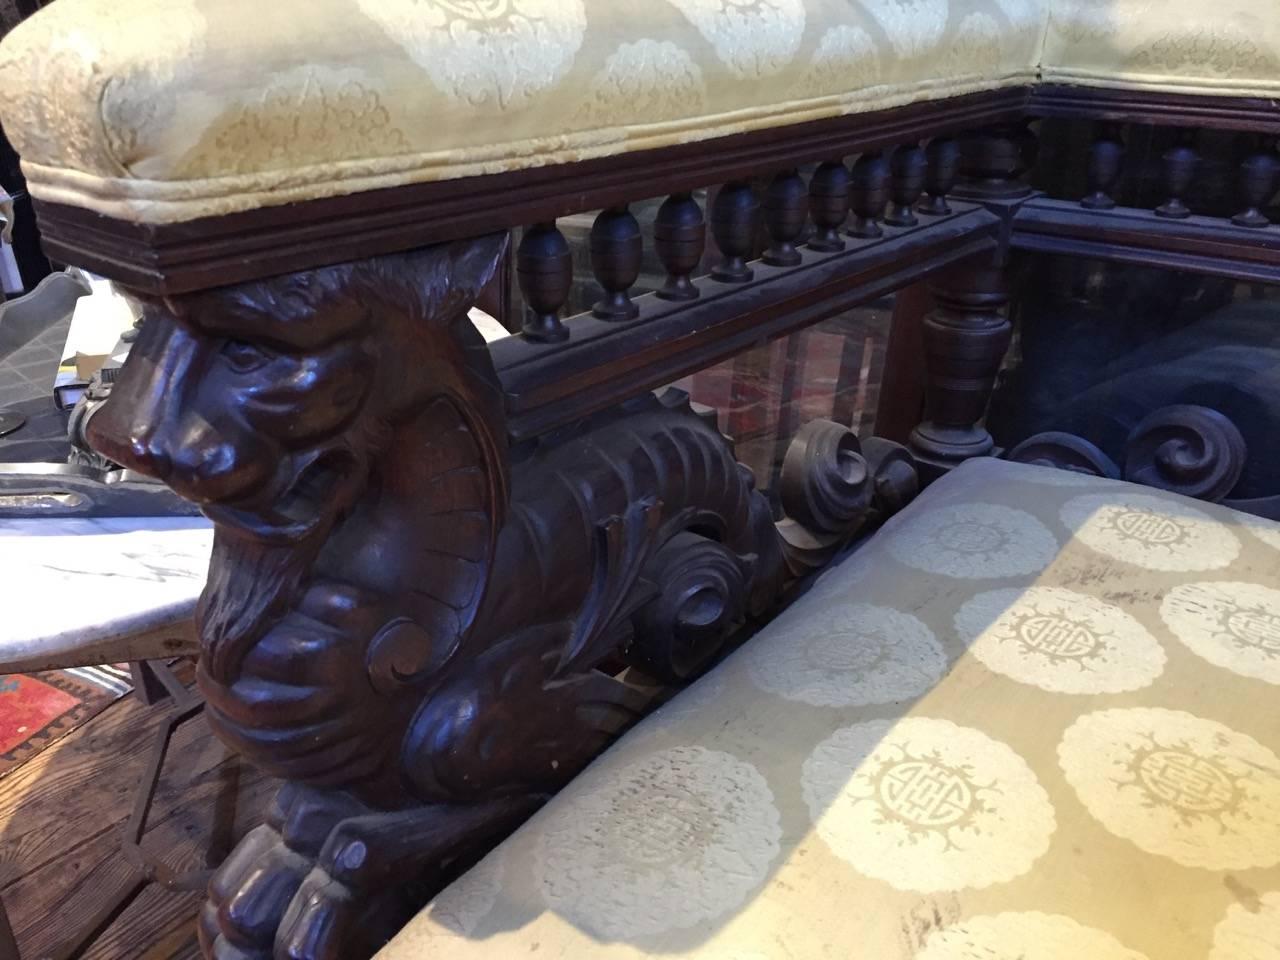 Pair of American Victorian mahogany corner chairs, circa 1890, that when pushed together make a handsome settee. Carved wood is impressive with animal figures and turned spindles that make a gallery near the top periphery.